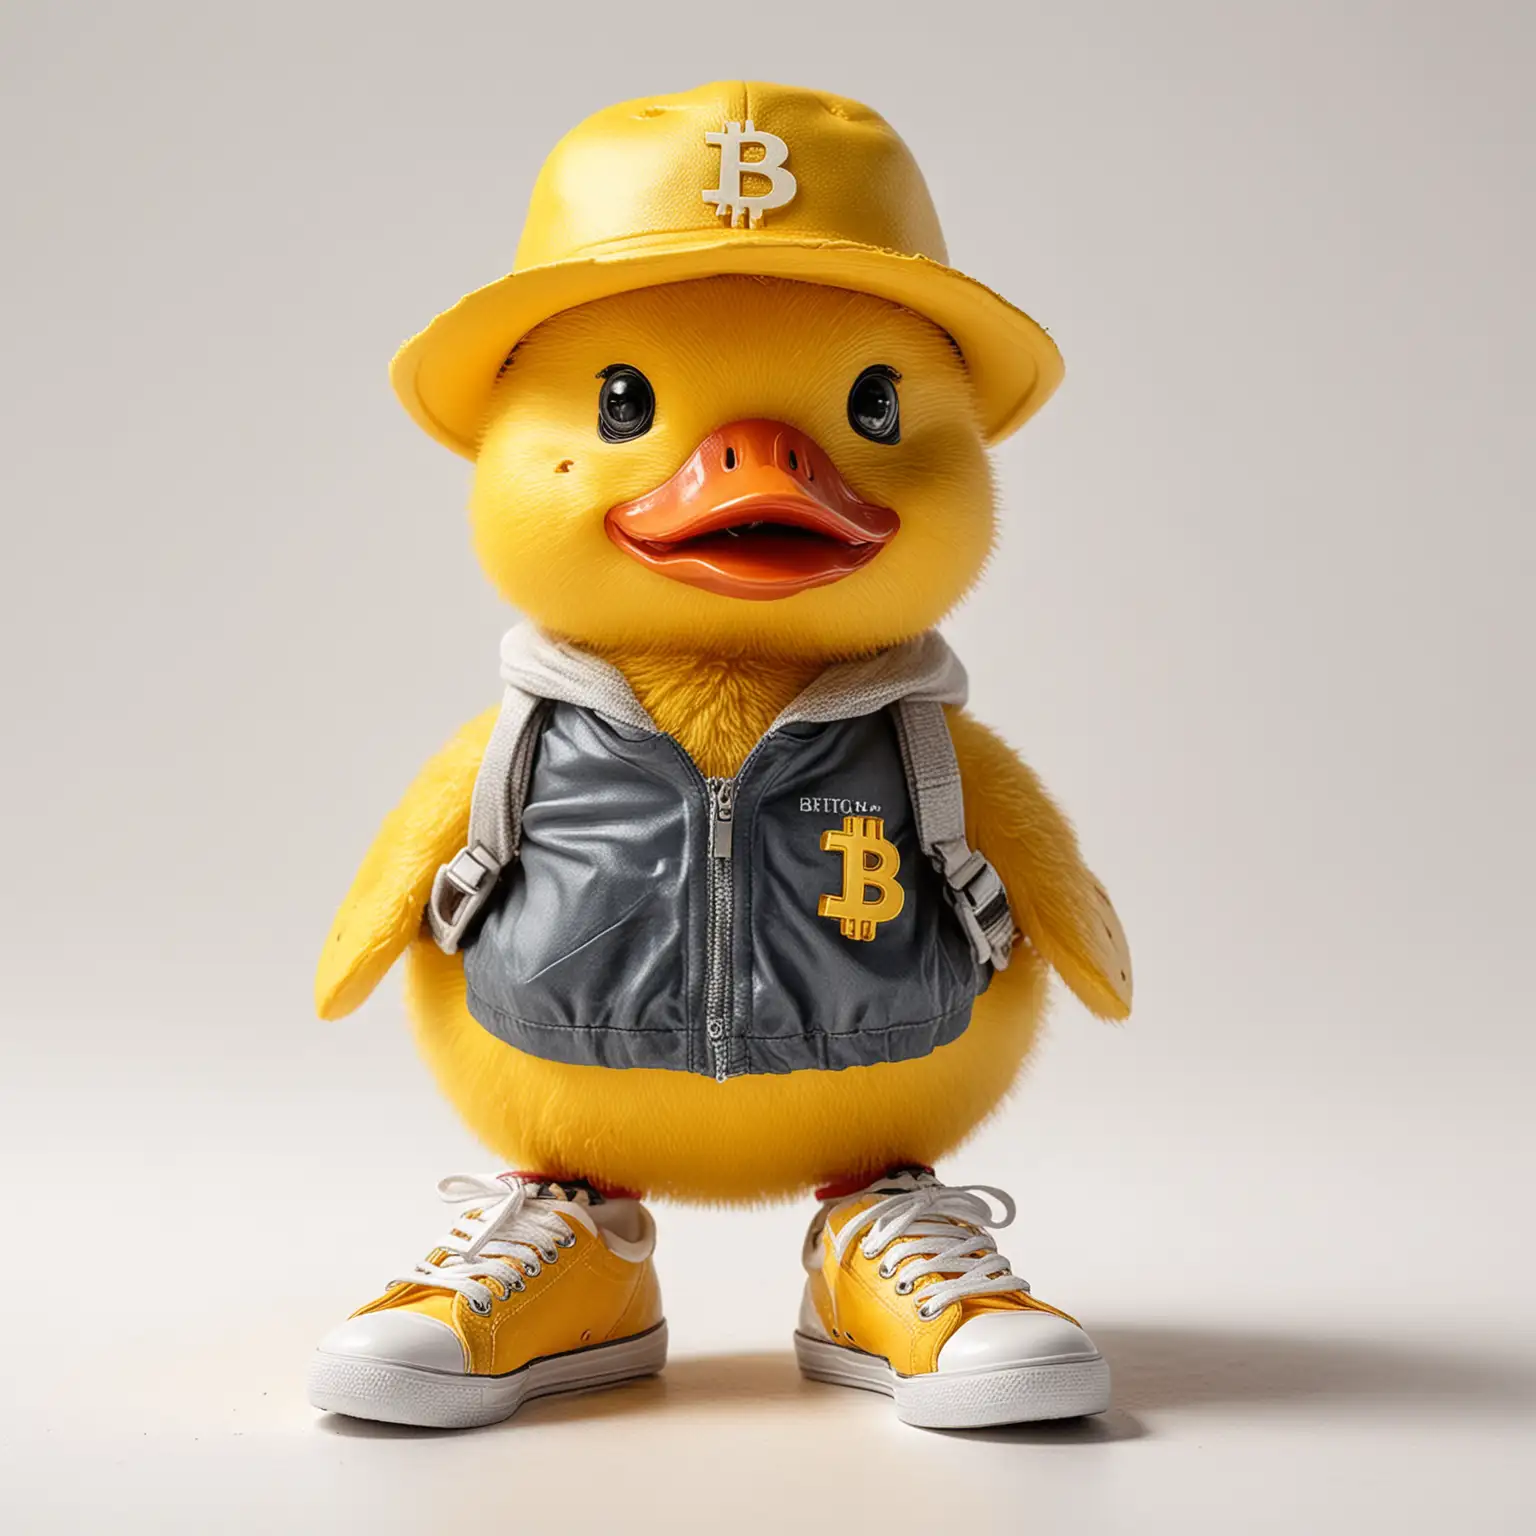 Bitcoin Yellow Duck Wearing Hat and Sneakers on White Background